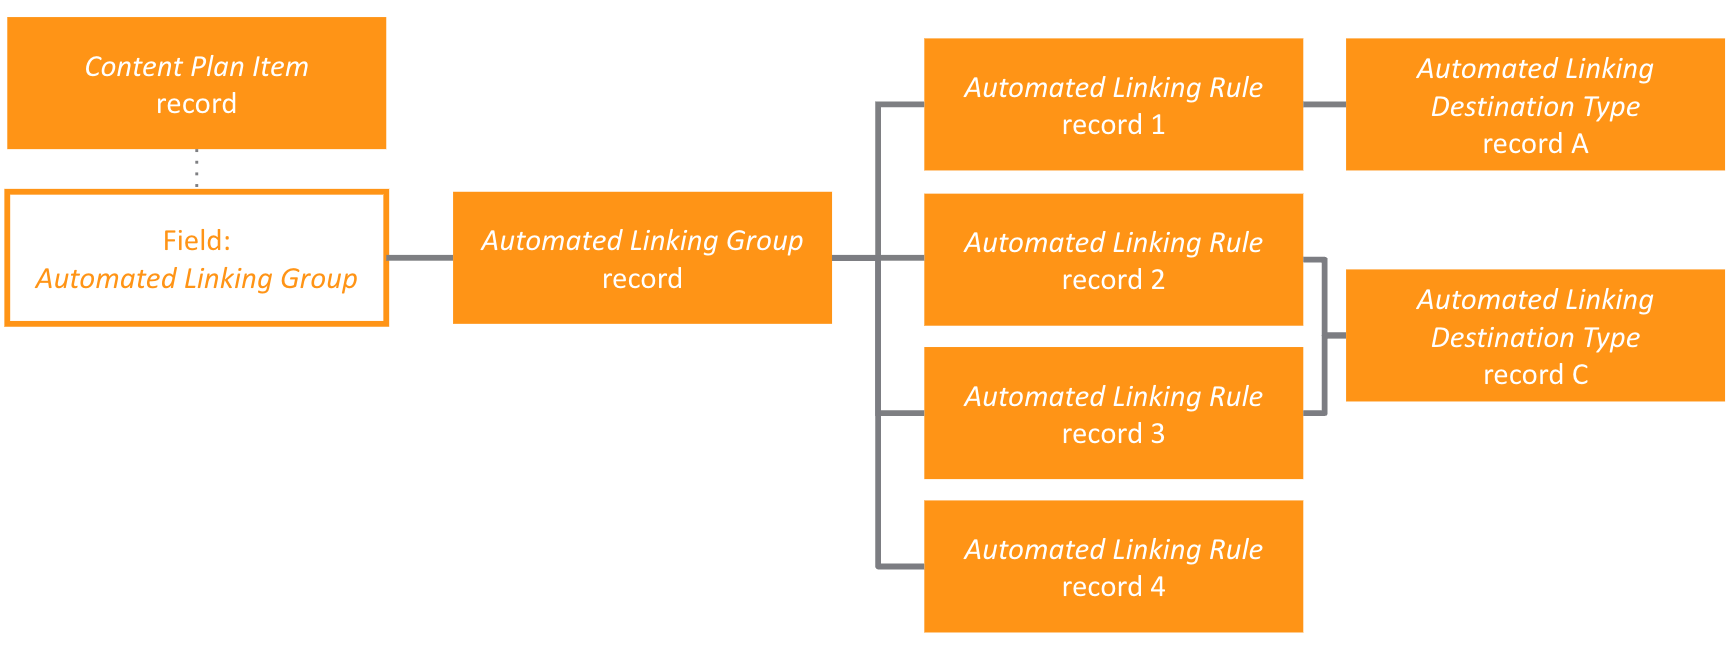 automated linking object relationships